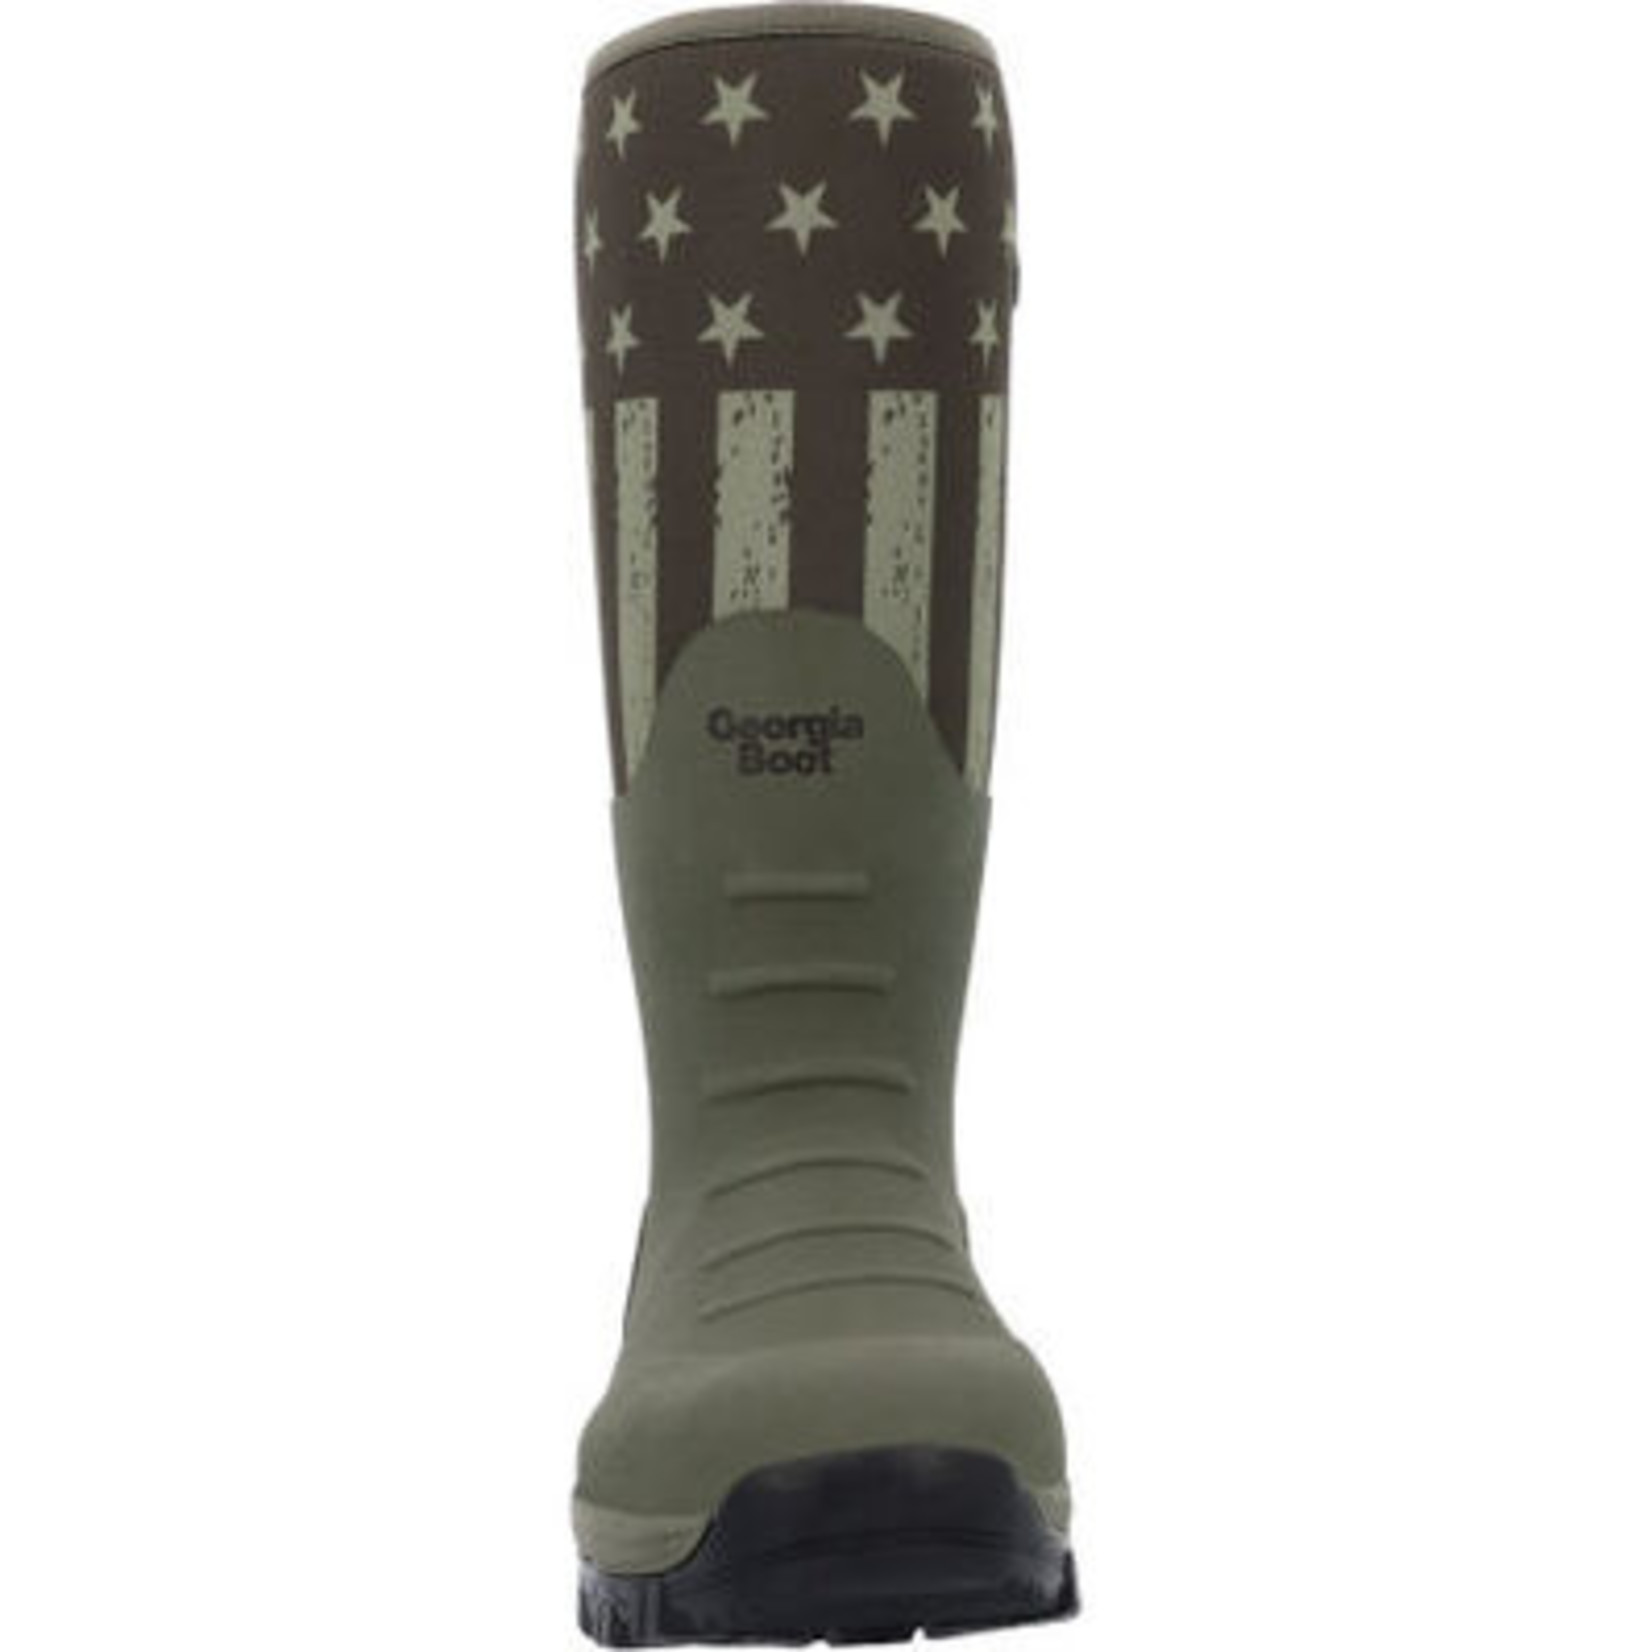 GEORGIA BOOT CO. PATRIOTIC 16" RUBBER PULL ON WORK BOOT